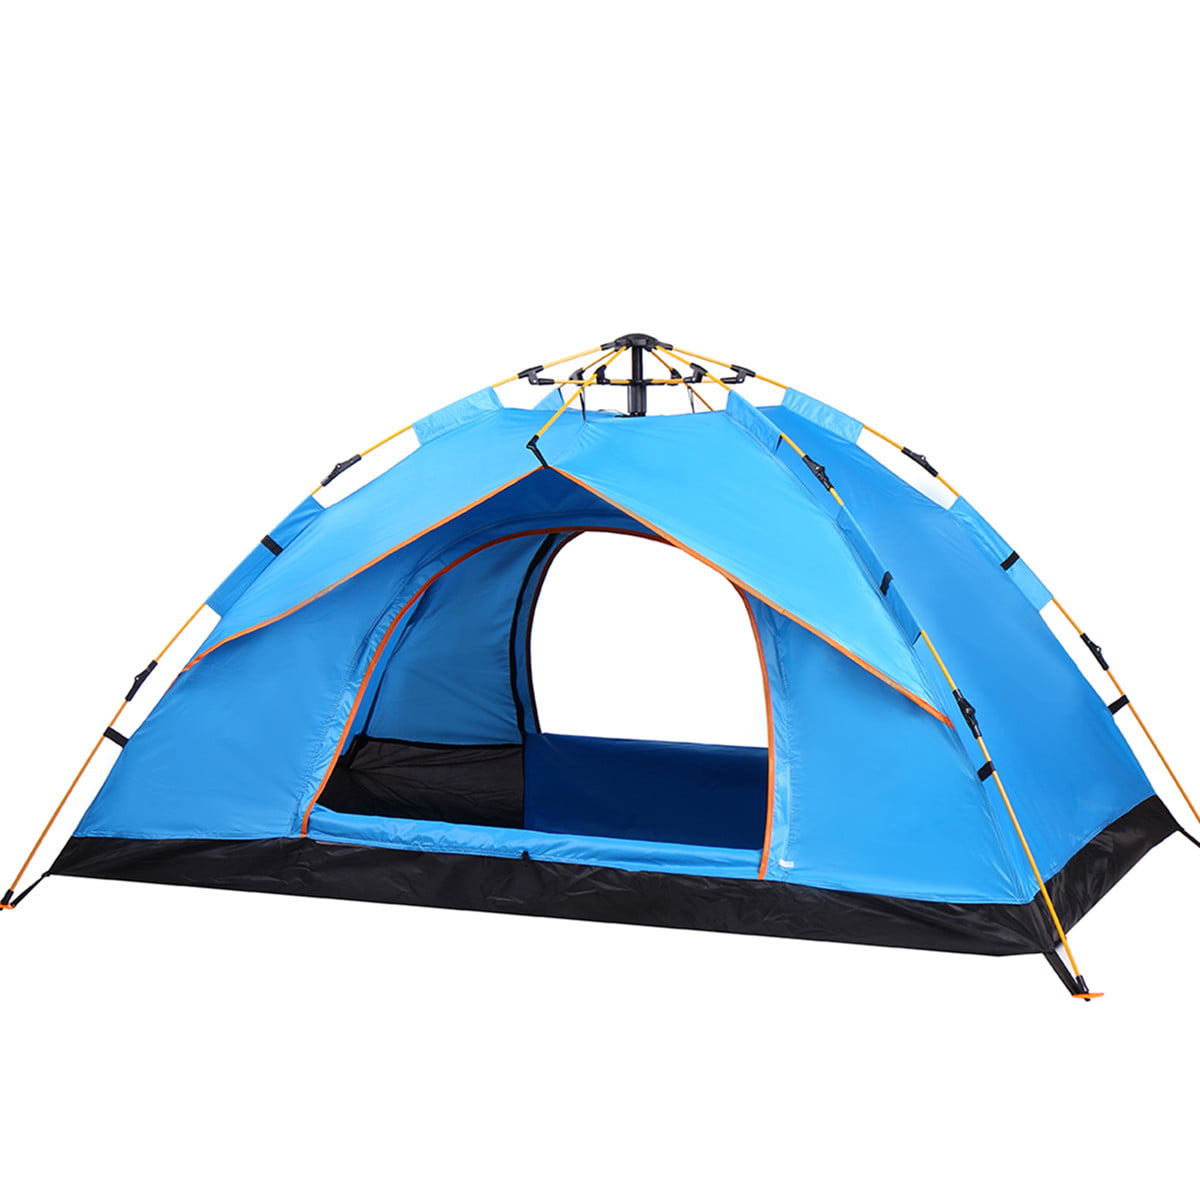 HUIYINGYANG 3-4 Persons Large Pop up Tent Waterproof Family Hiking Tent Opens Instantly in Seconds Camping Automatic Tent